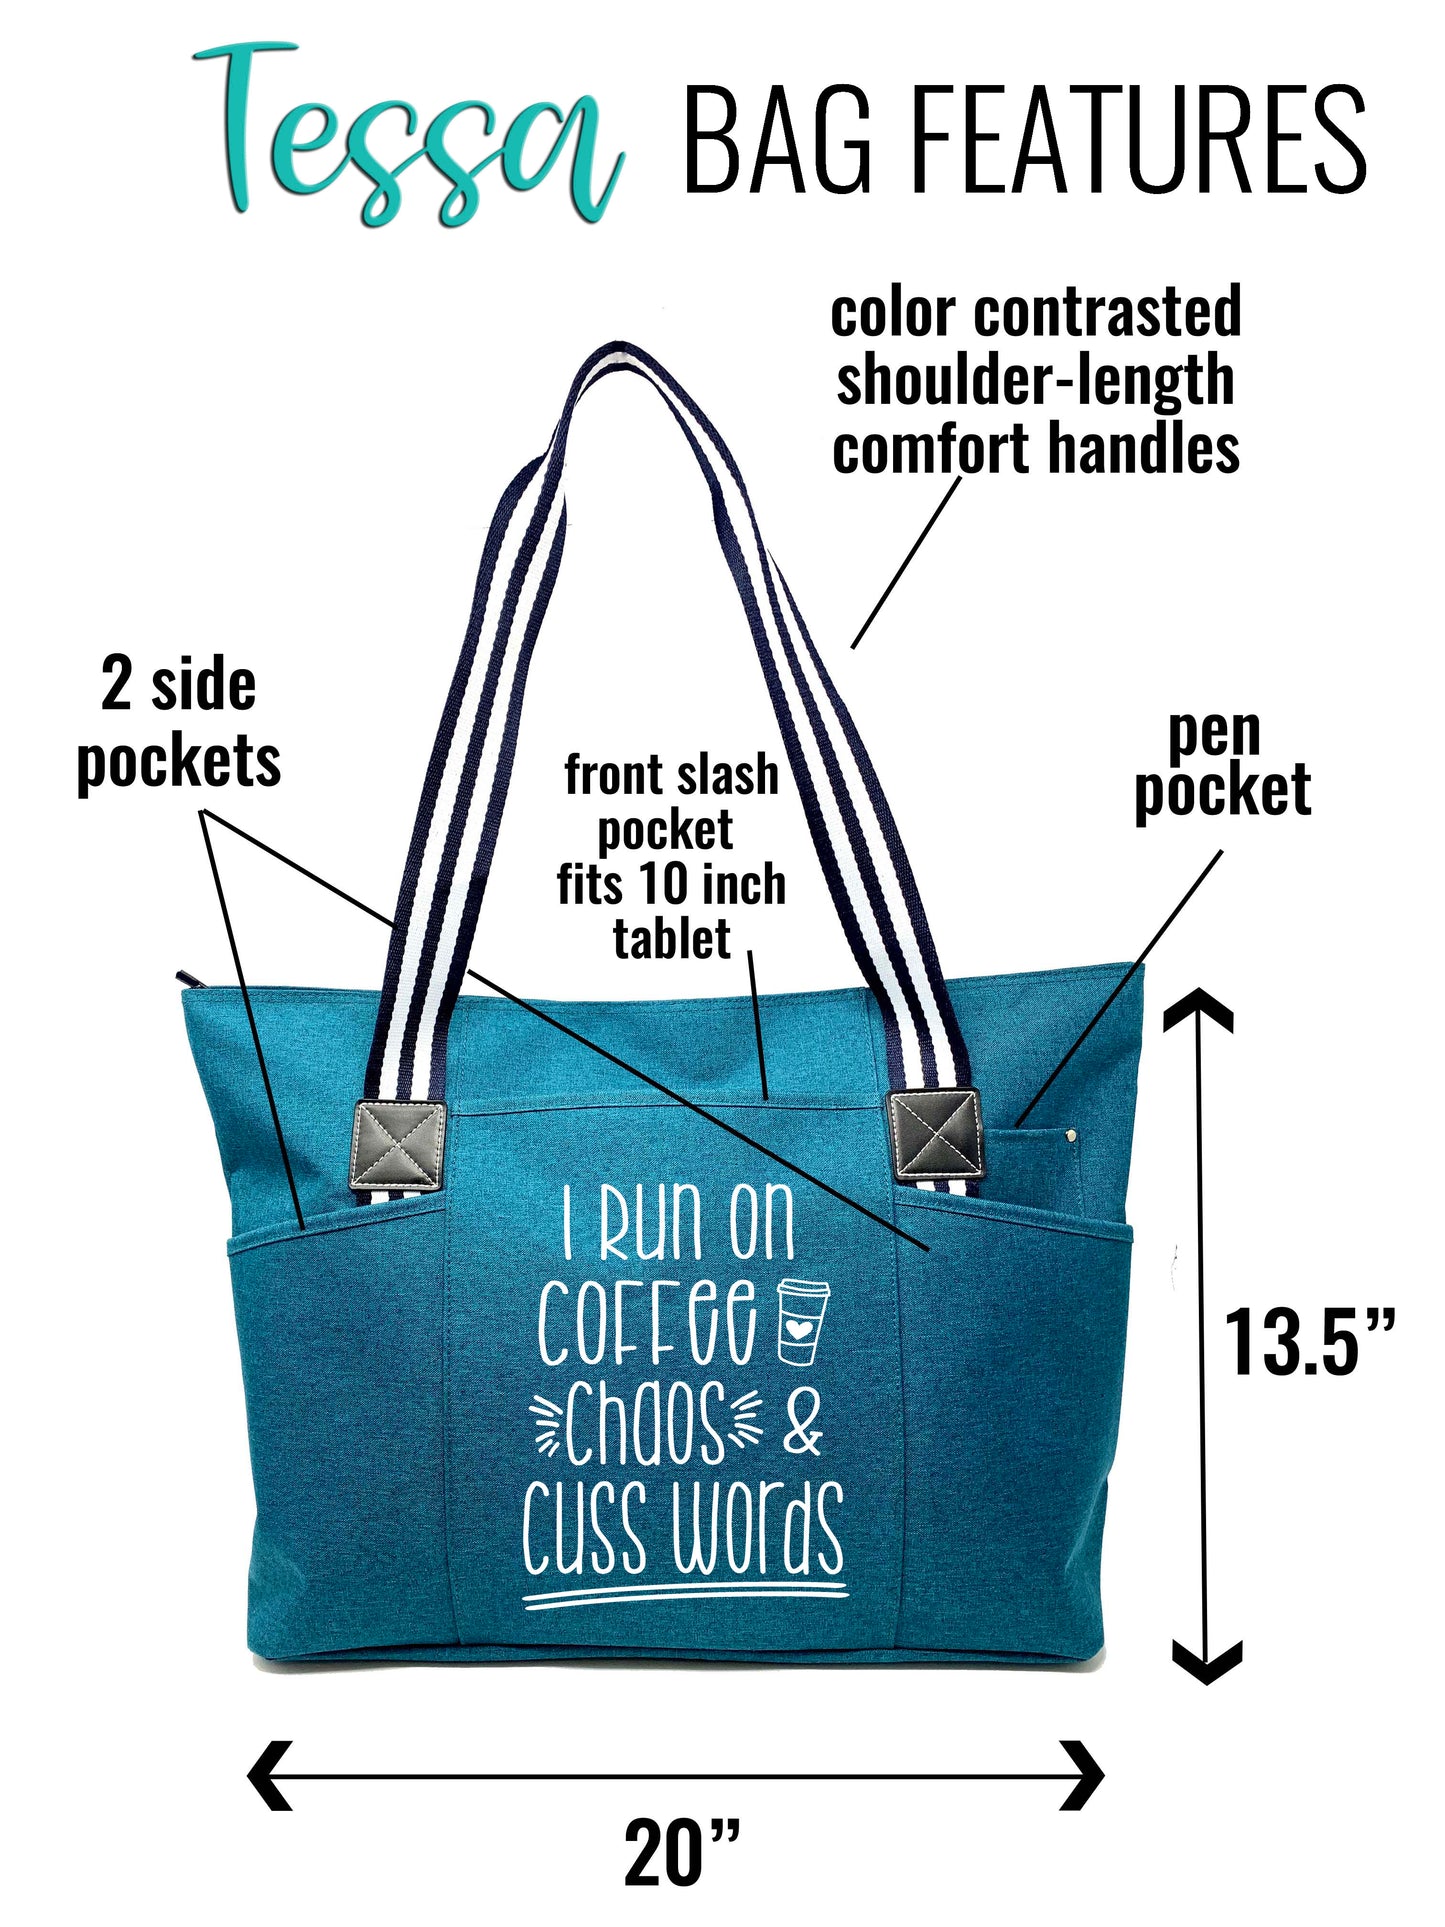 I Run on Coffee Chaos and Cuss Words Tessa Teal Tote Bag for Bosses